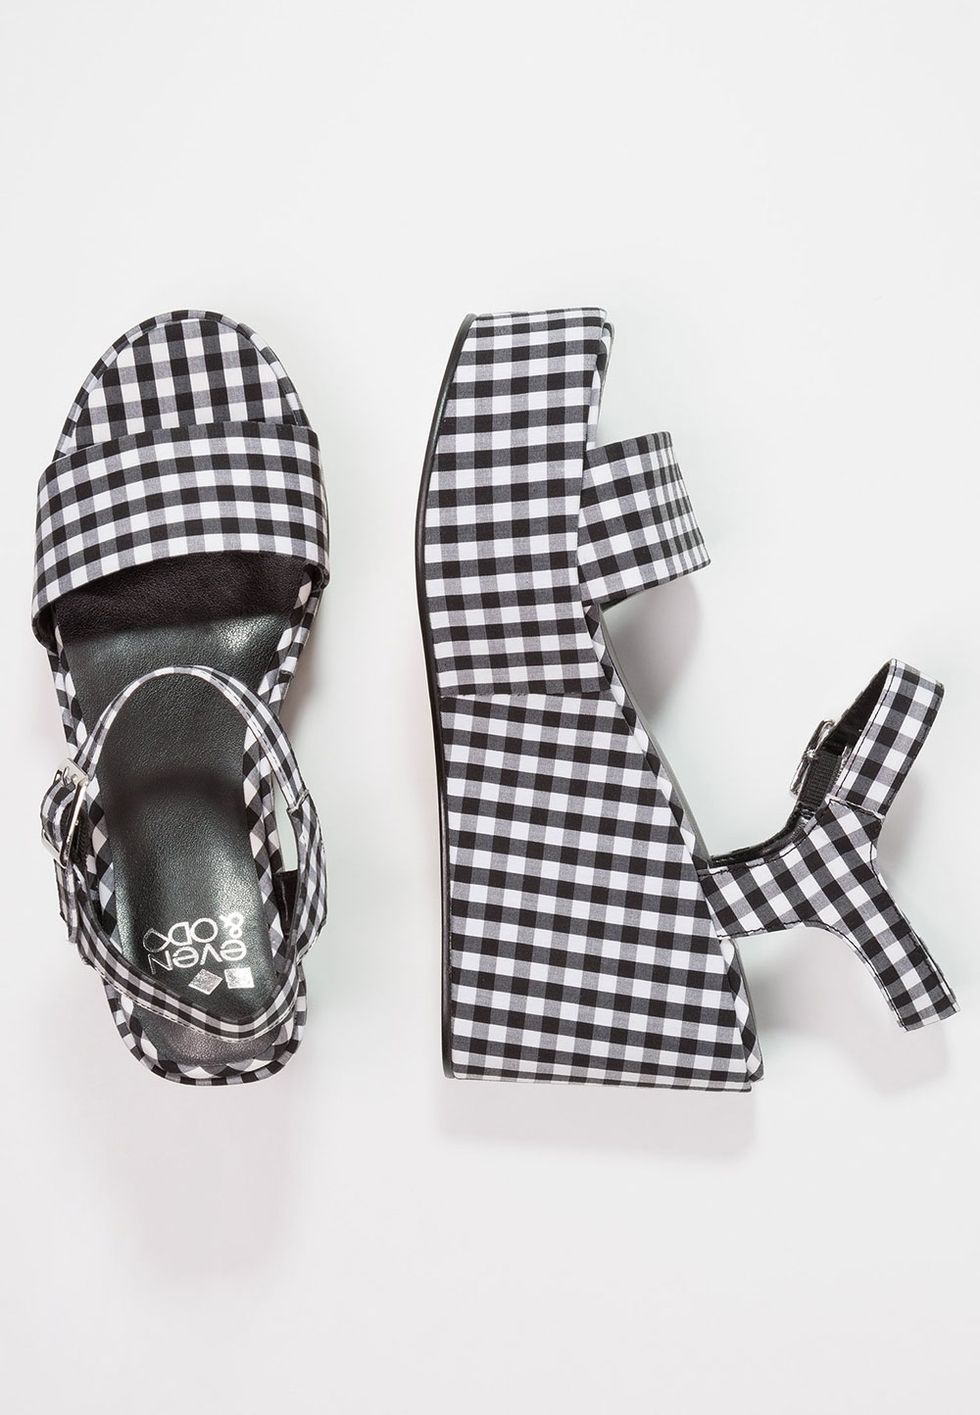 Footwear, Design, Pattern, Shoe, Tartan, Plaid, Personal protective equipment, Fashion accessory, Black-and-white, 